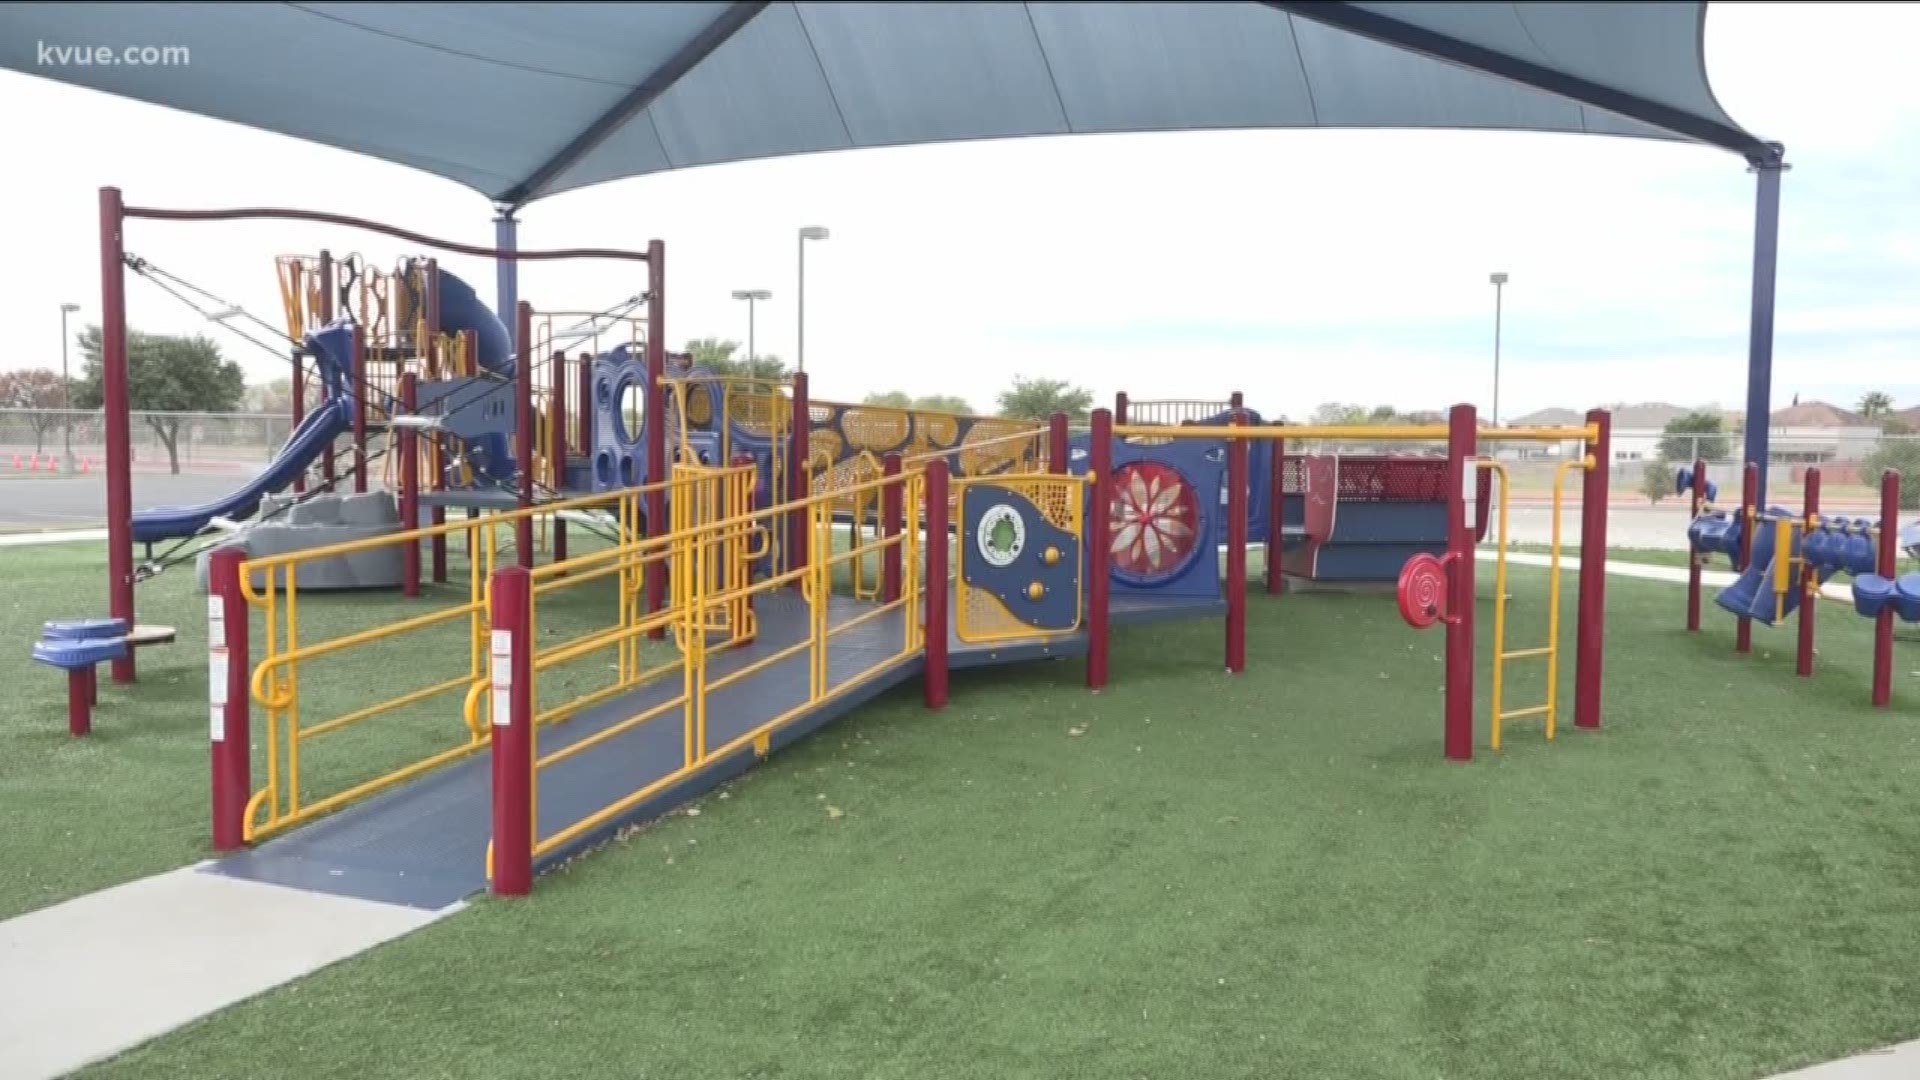 The district is putting in a ramp and using soft turf that helps kids with disabilities join in on the fun.